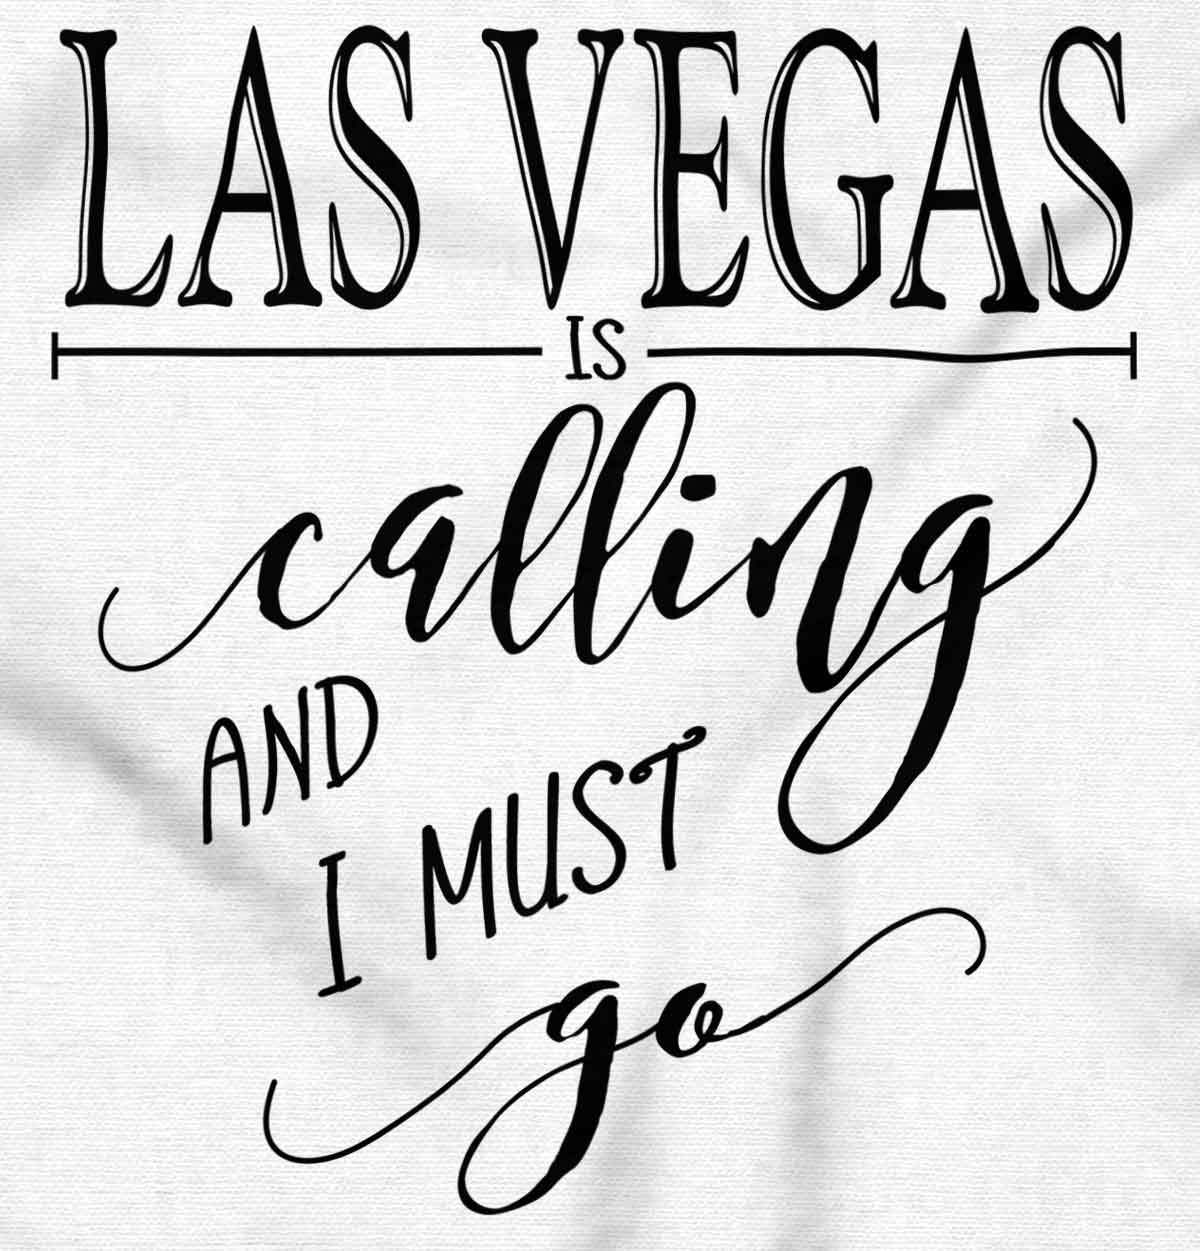 Las Vegas is Calling I Must Go Women's Graphic T Shirt Tees Brisco Brands 3X - image 2 of 5